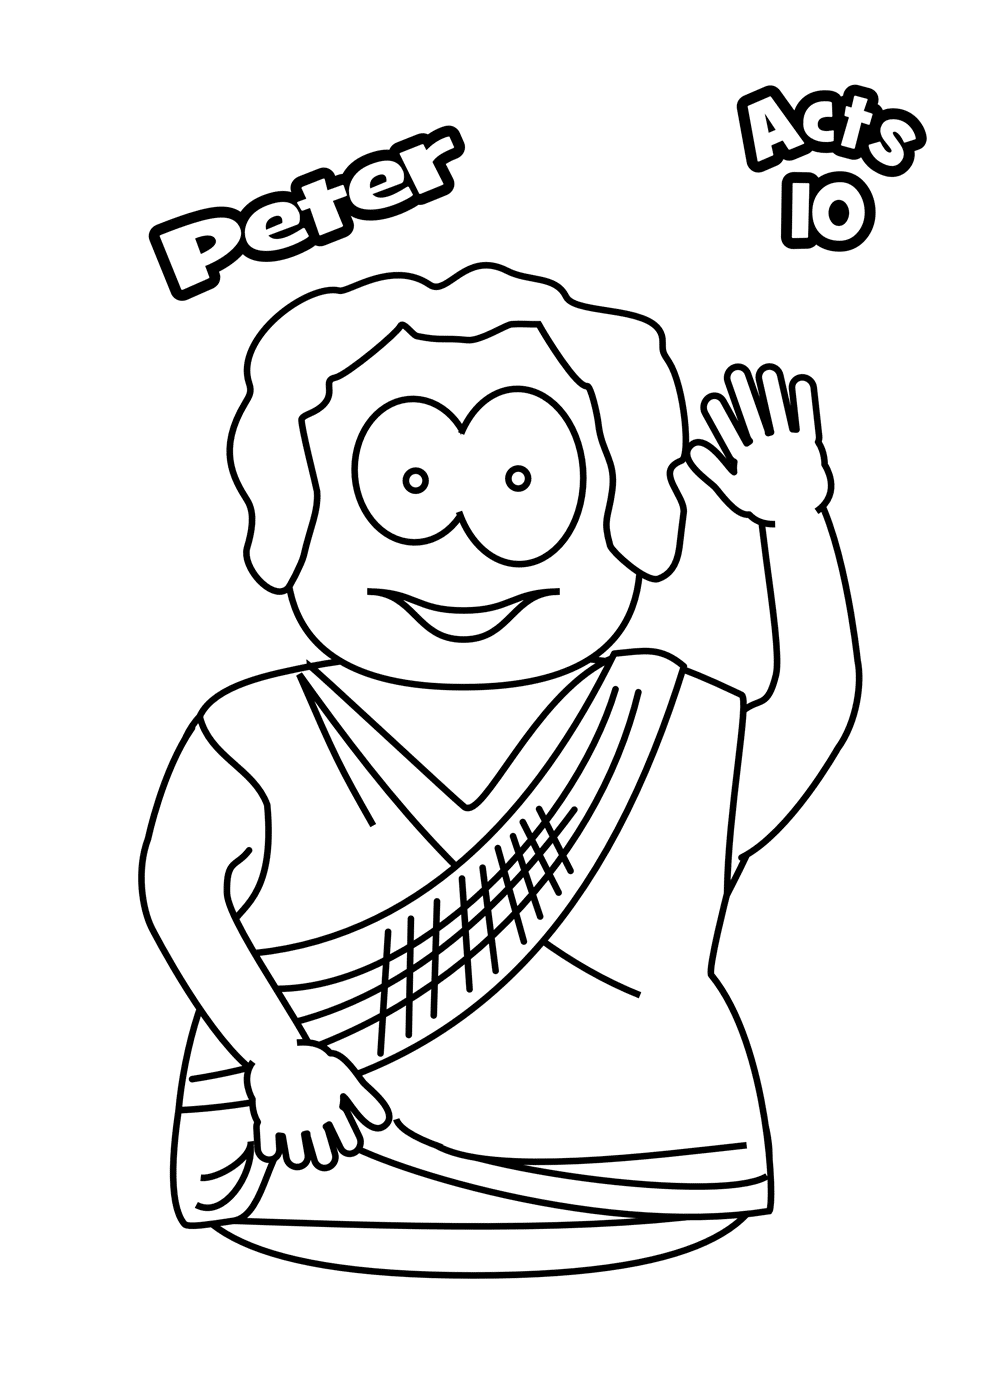 121-Peter-colouring